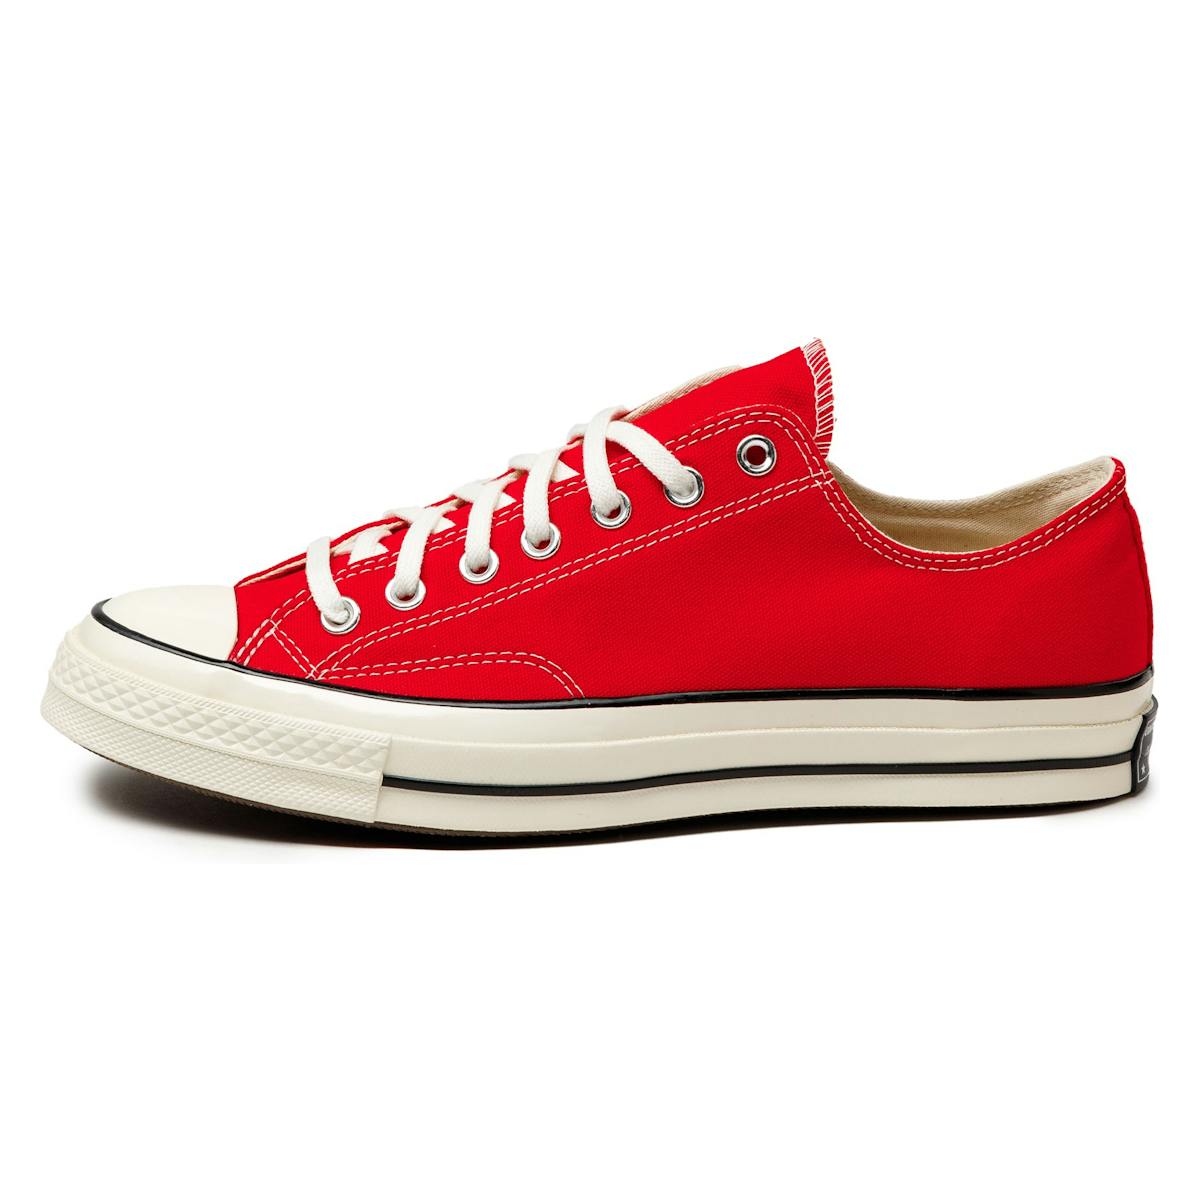 Converse Chuck Taylor All Star 70 Ox Seasonal Color Fever Dream Red